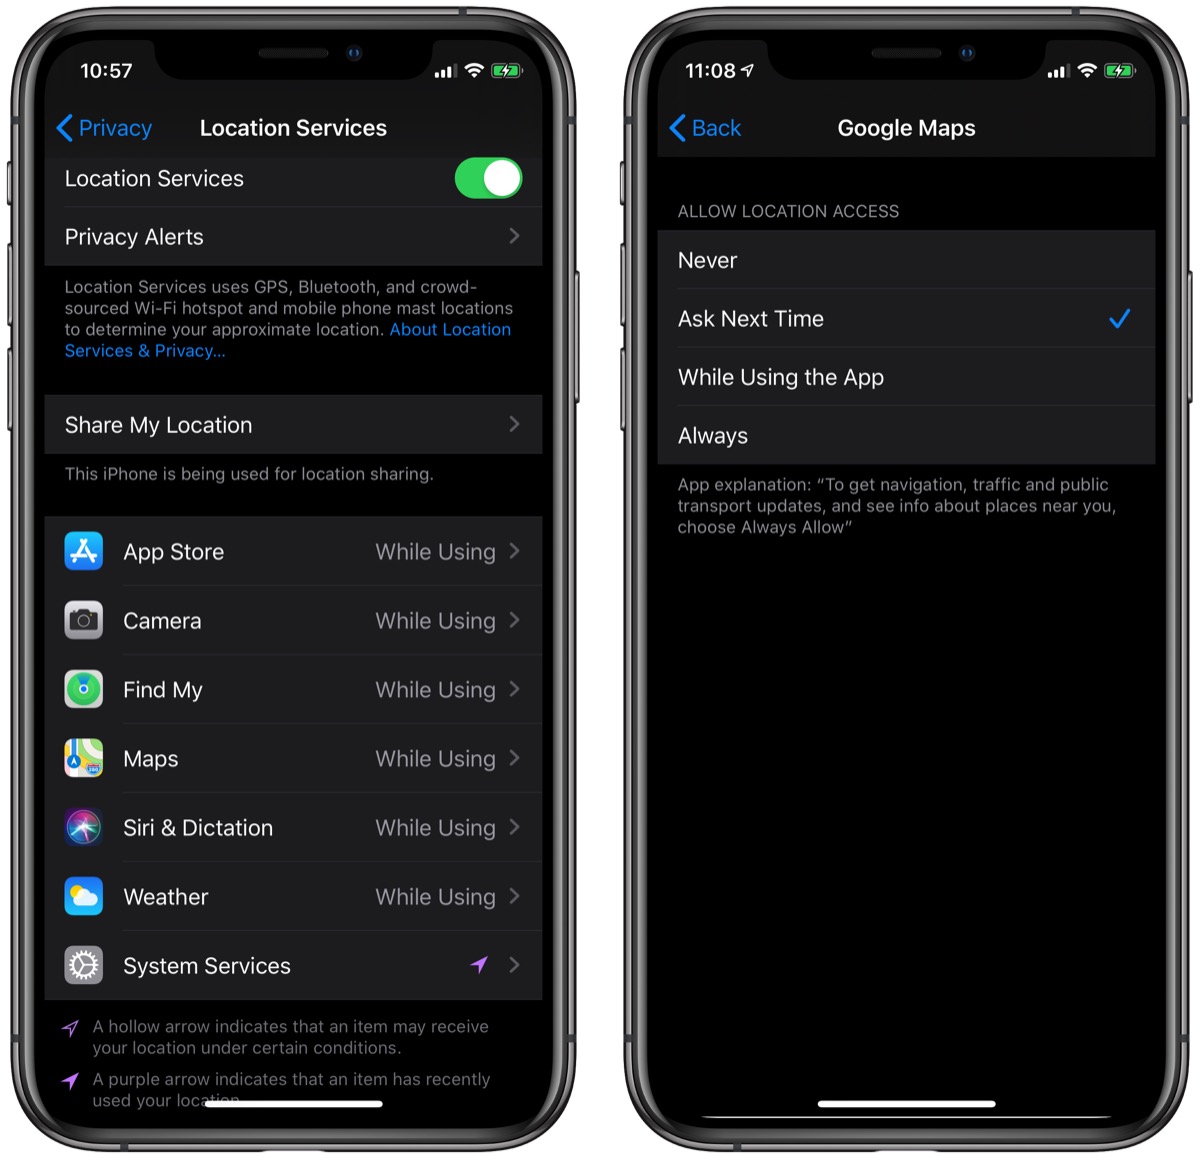 How to Restrict an App's Location Access in iOS 13 - MacRumors